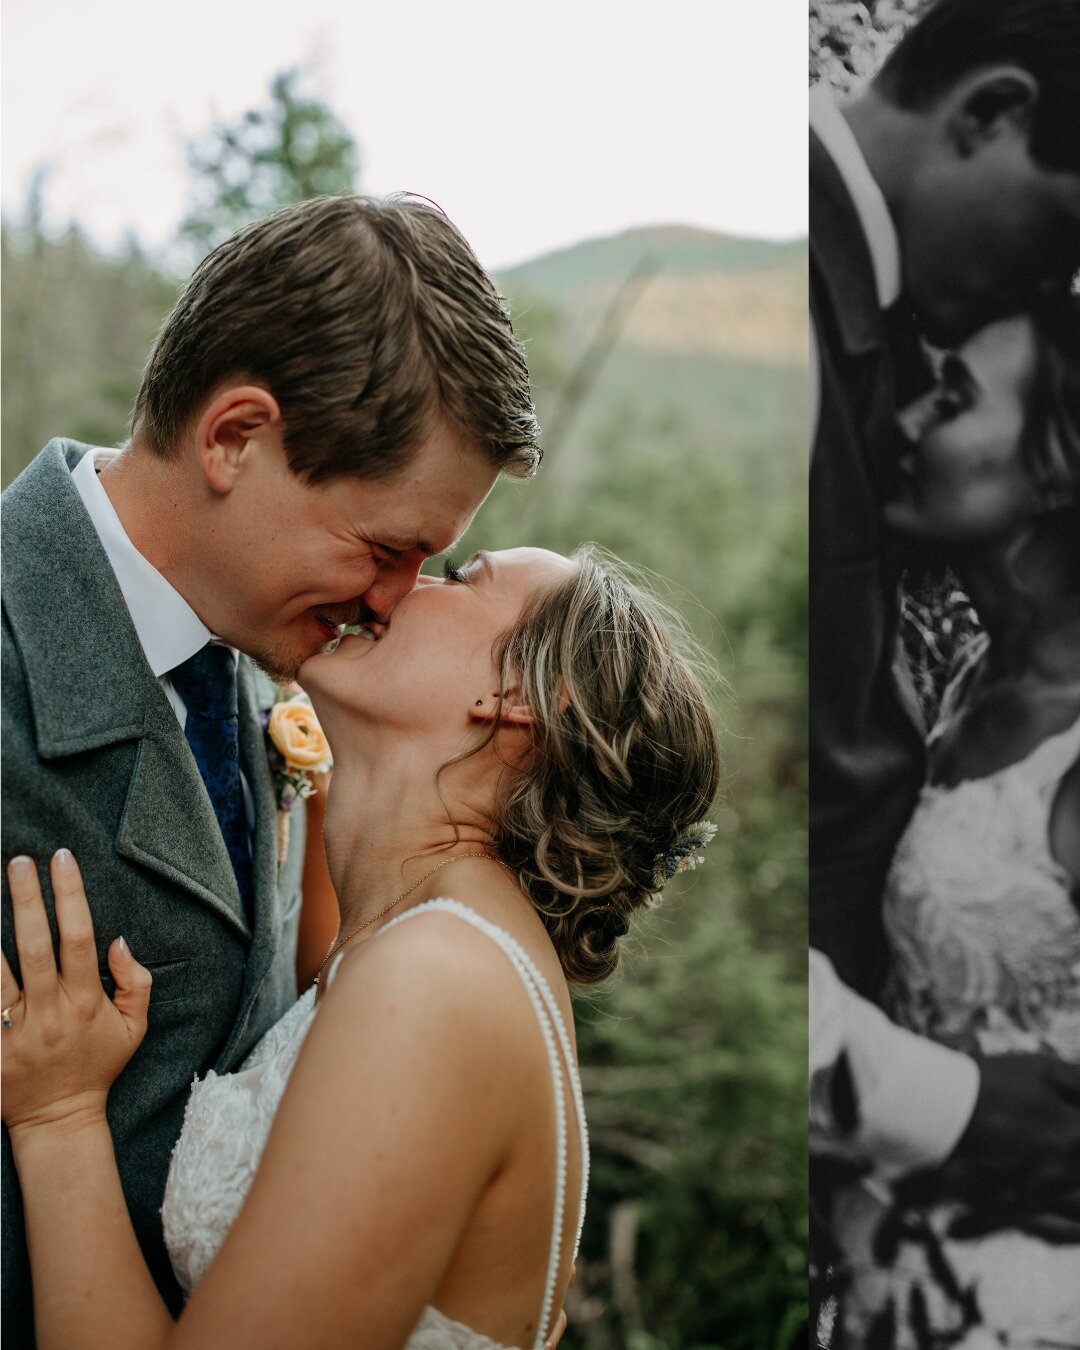 Quincy + Maggie Grupenhoff
6.16.23

Because I can't help myself, here's more from the Grupenhoff Wedding &lt;3